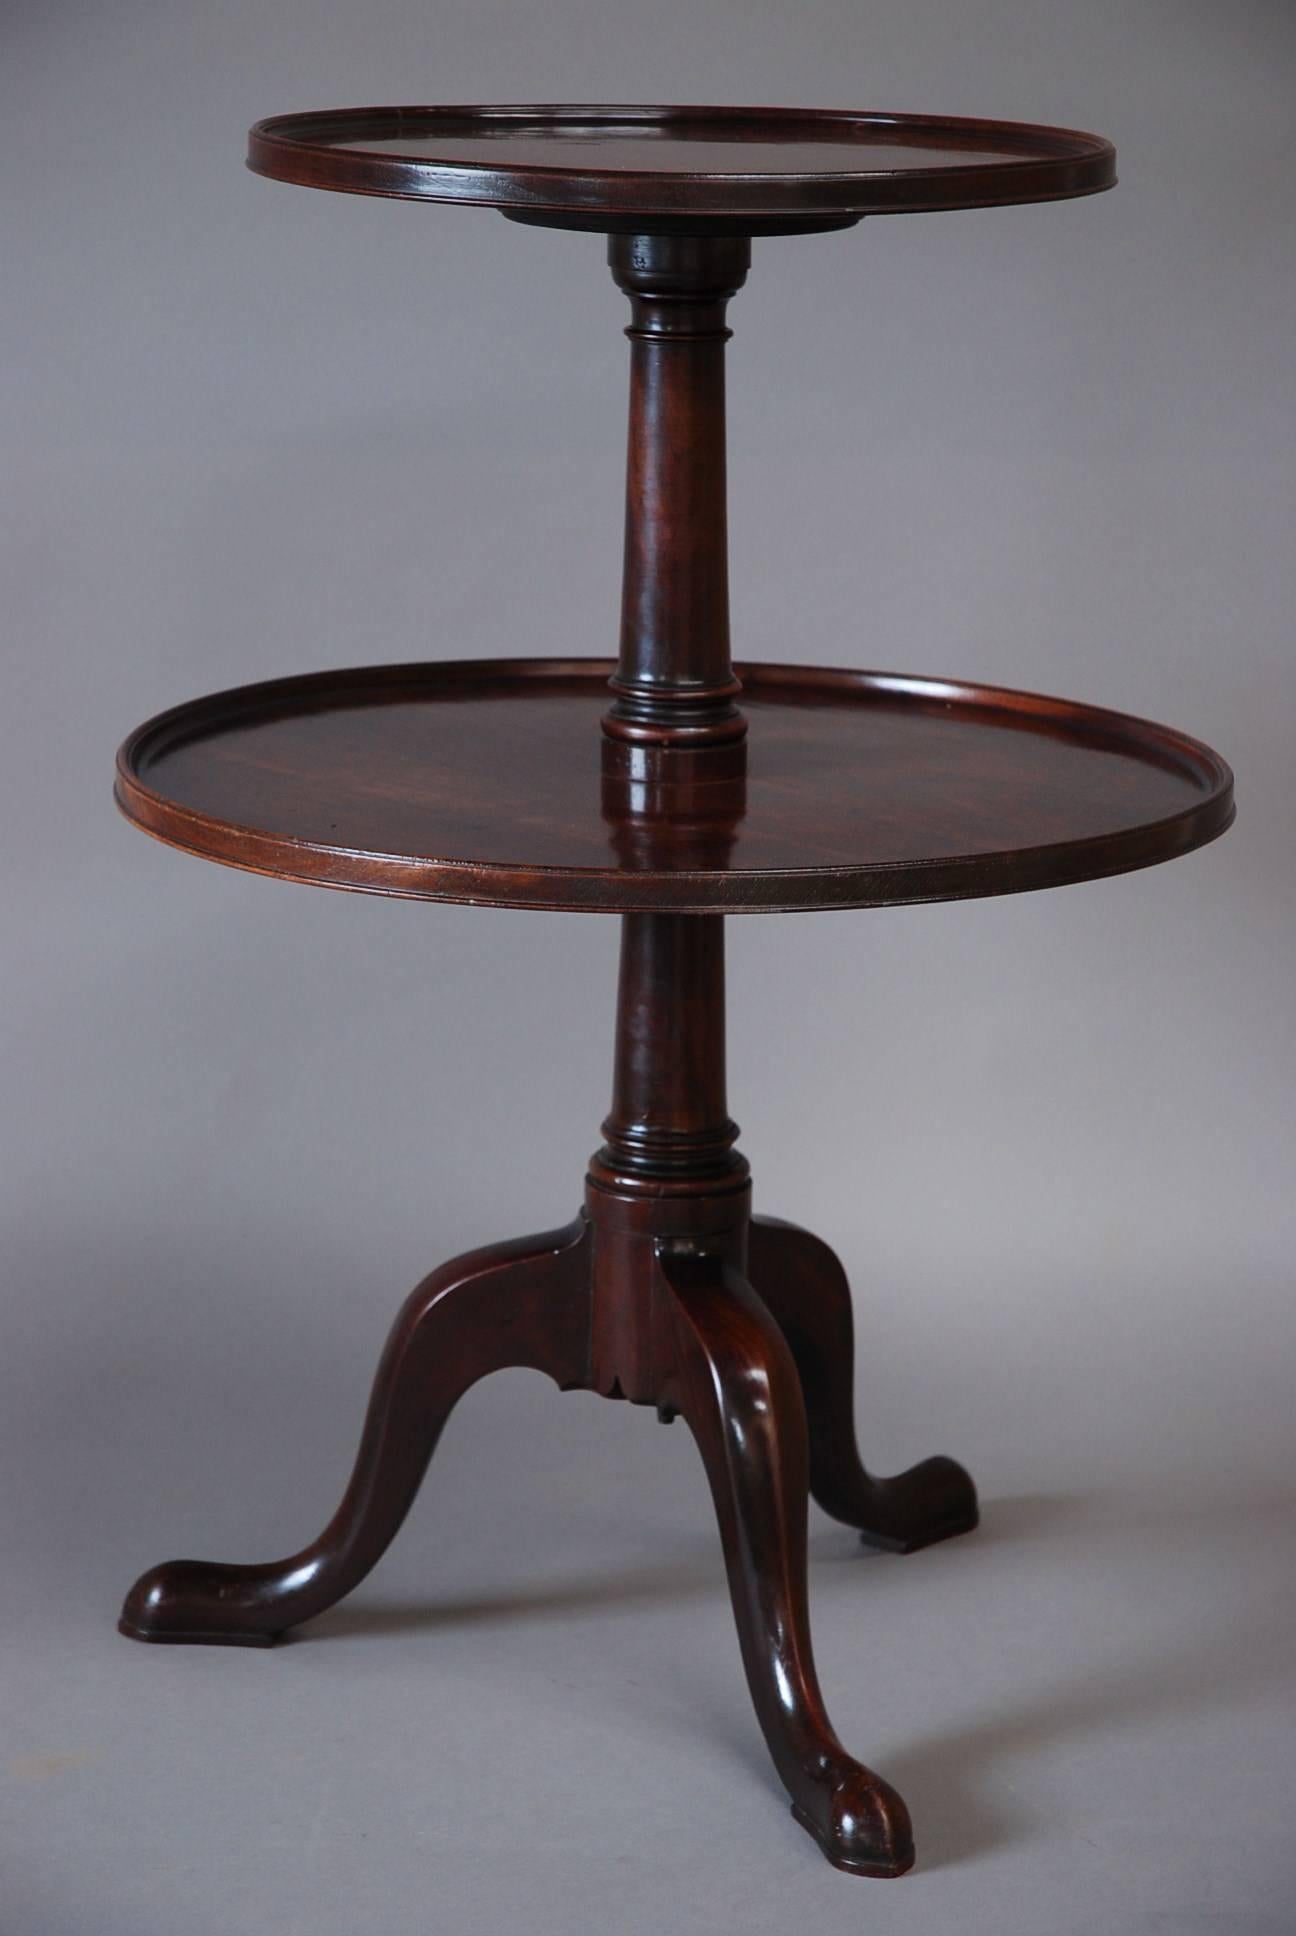 A late 18th century mahogany dumb waiter of good proportions and patina (color).

This item consists of two solid mahogany revolving tiers of dished circular form.

The tiers are supported by a turned gun barrel column and lead down to a